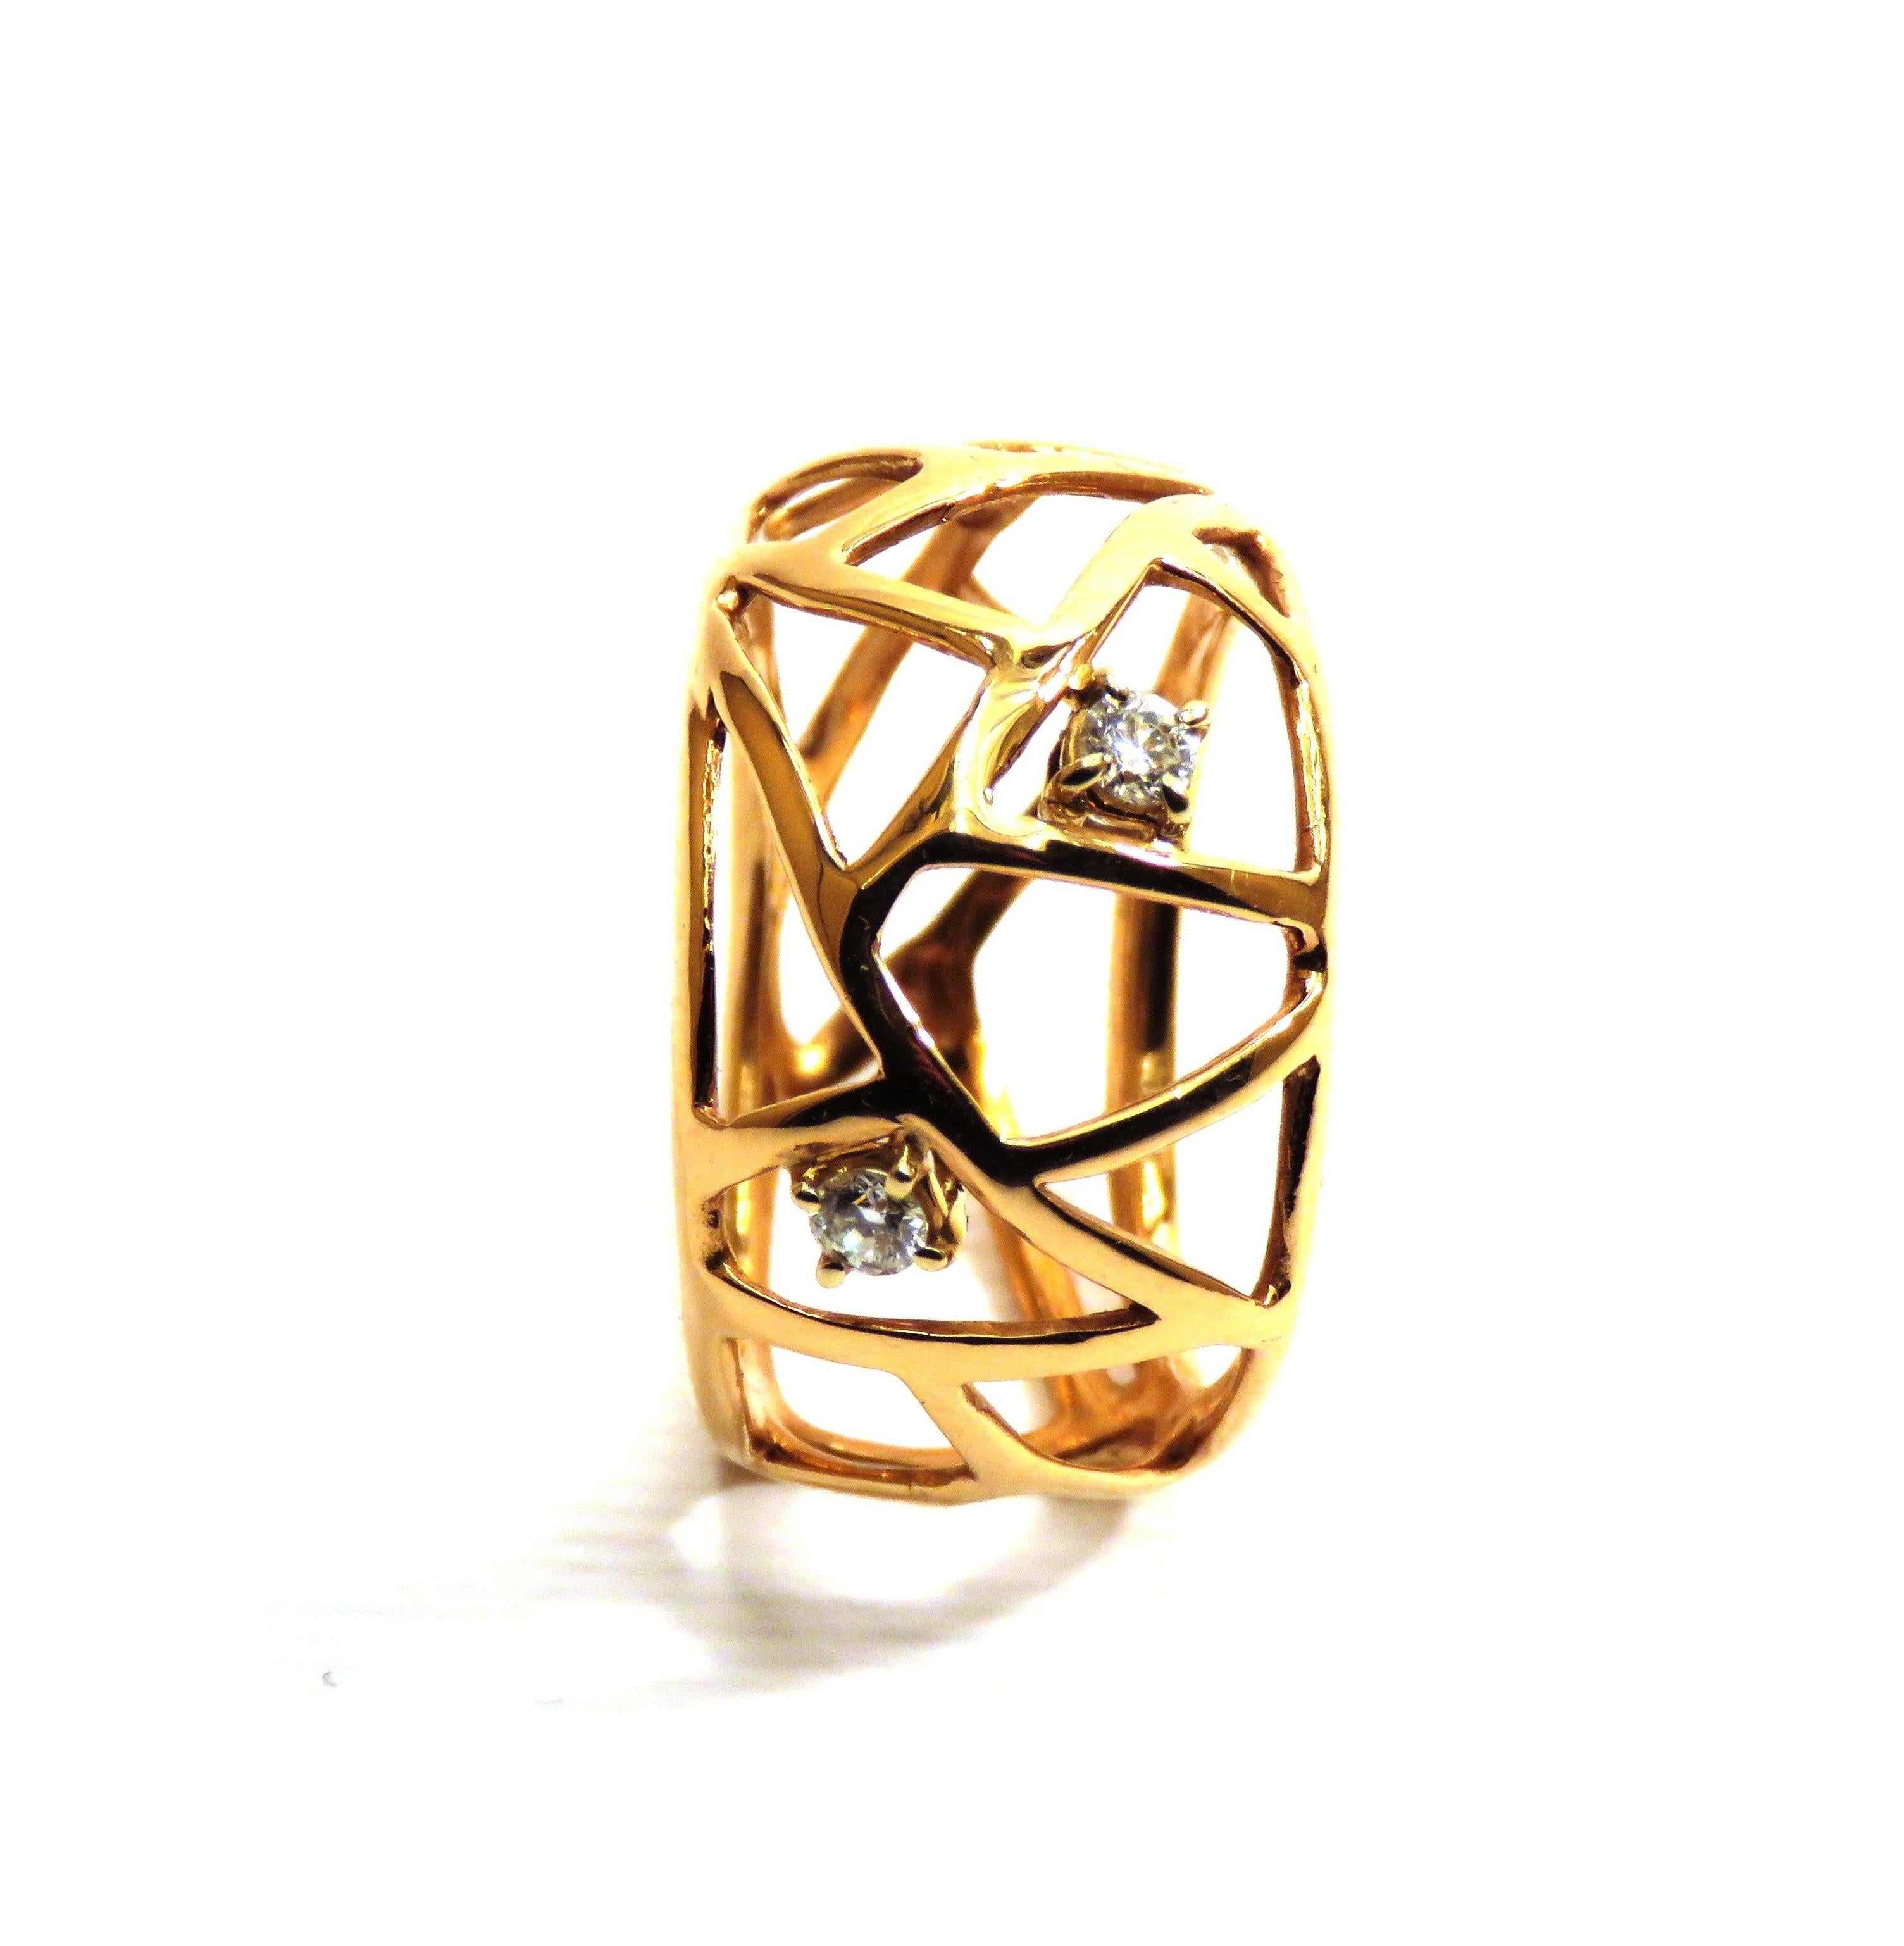 Modern 18 Karat Rose Gold Diamonds Ring Handcrafted in Italy by Botta Gioielli